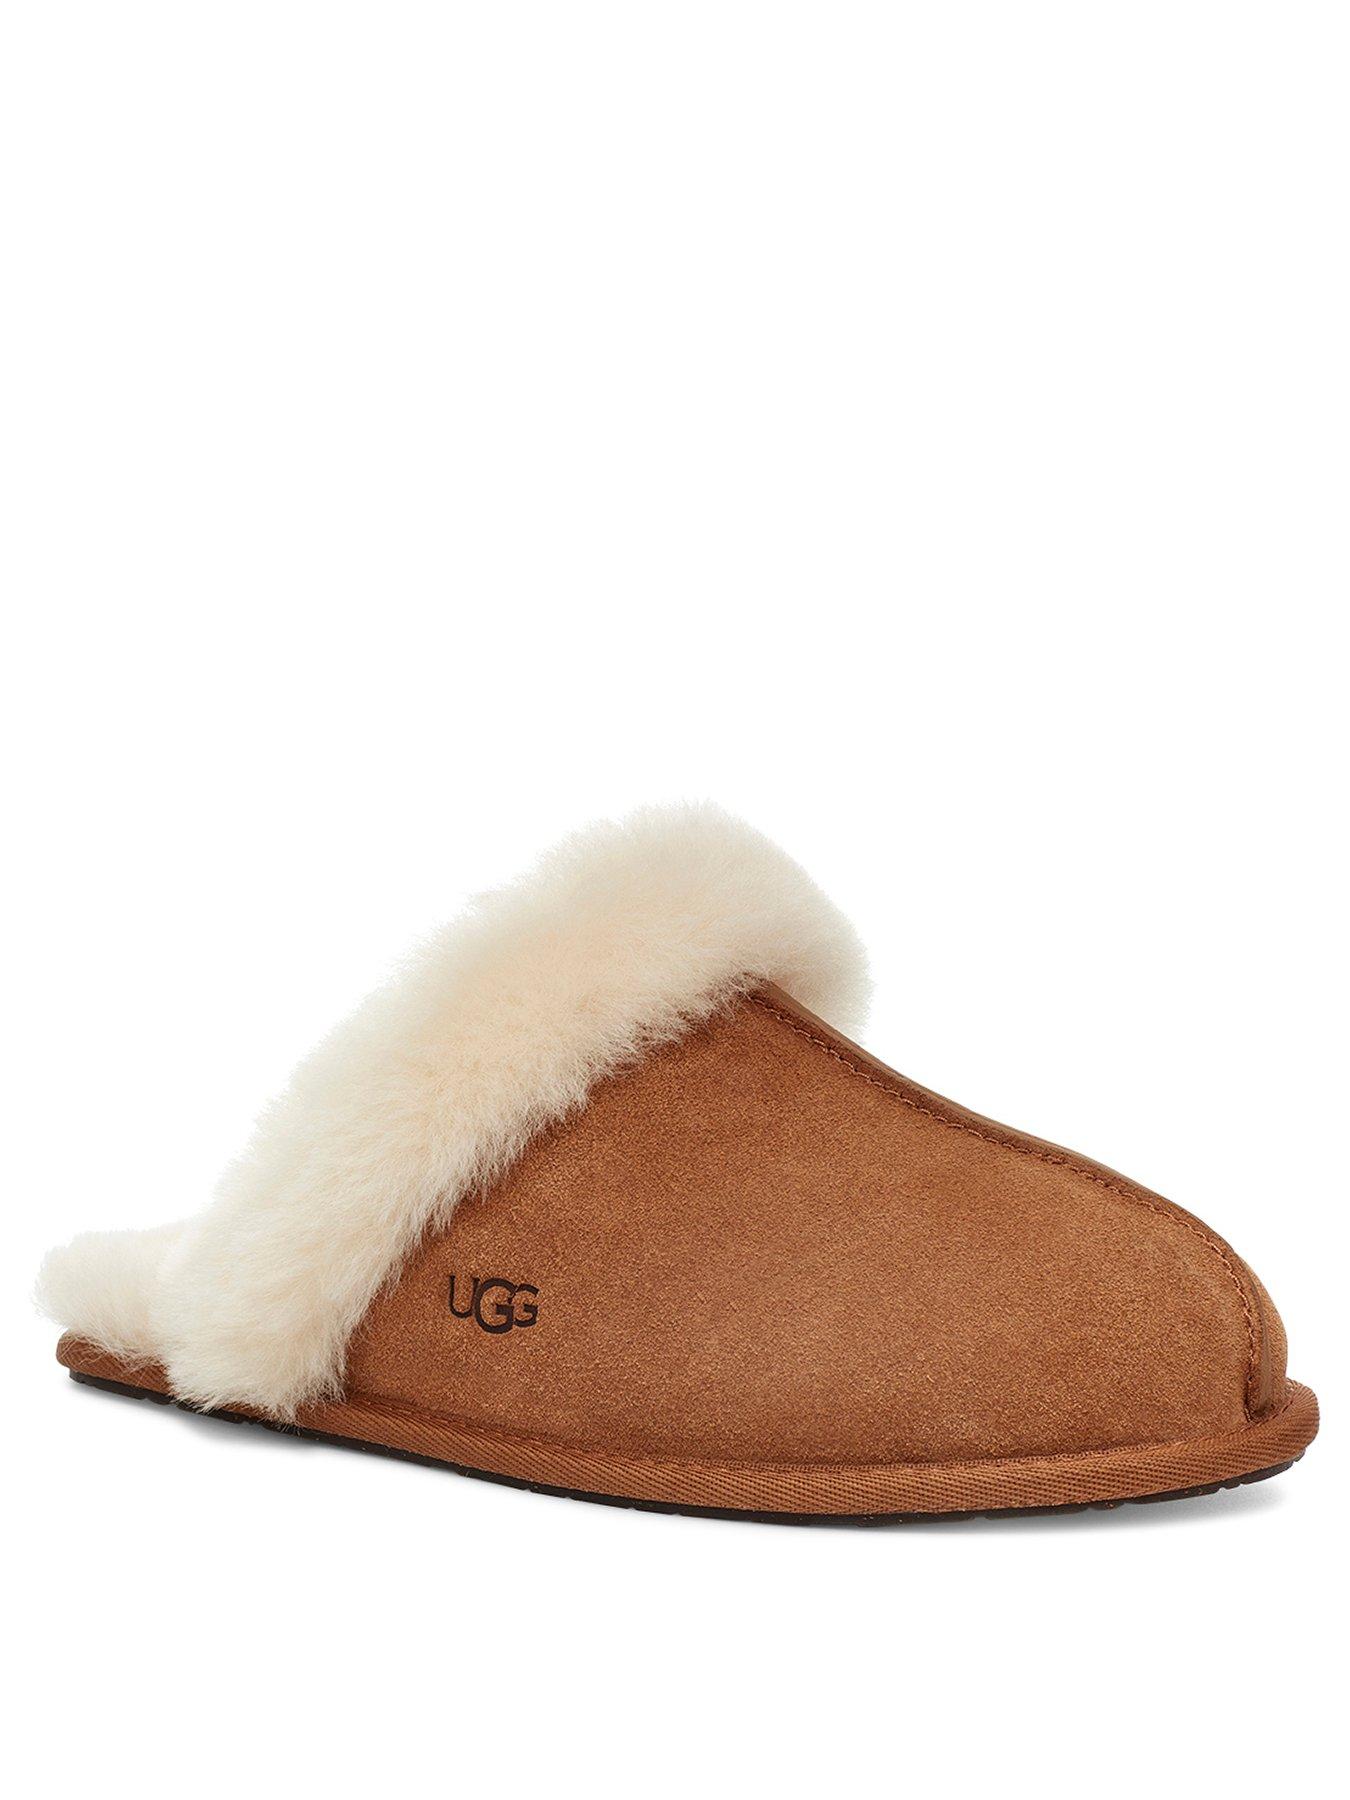 ugg lining replacements